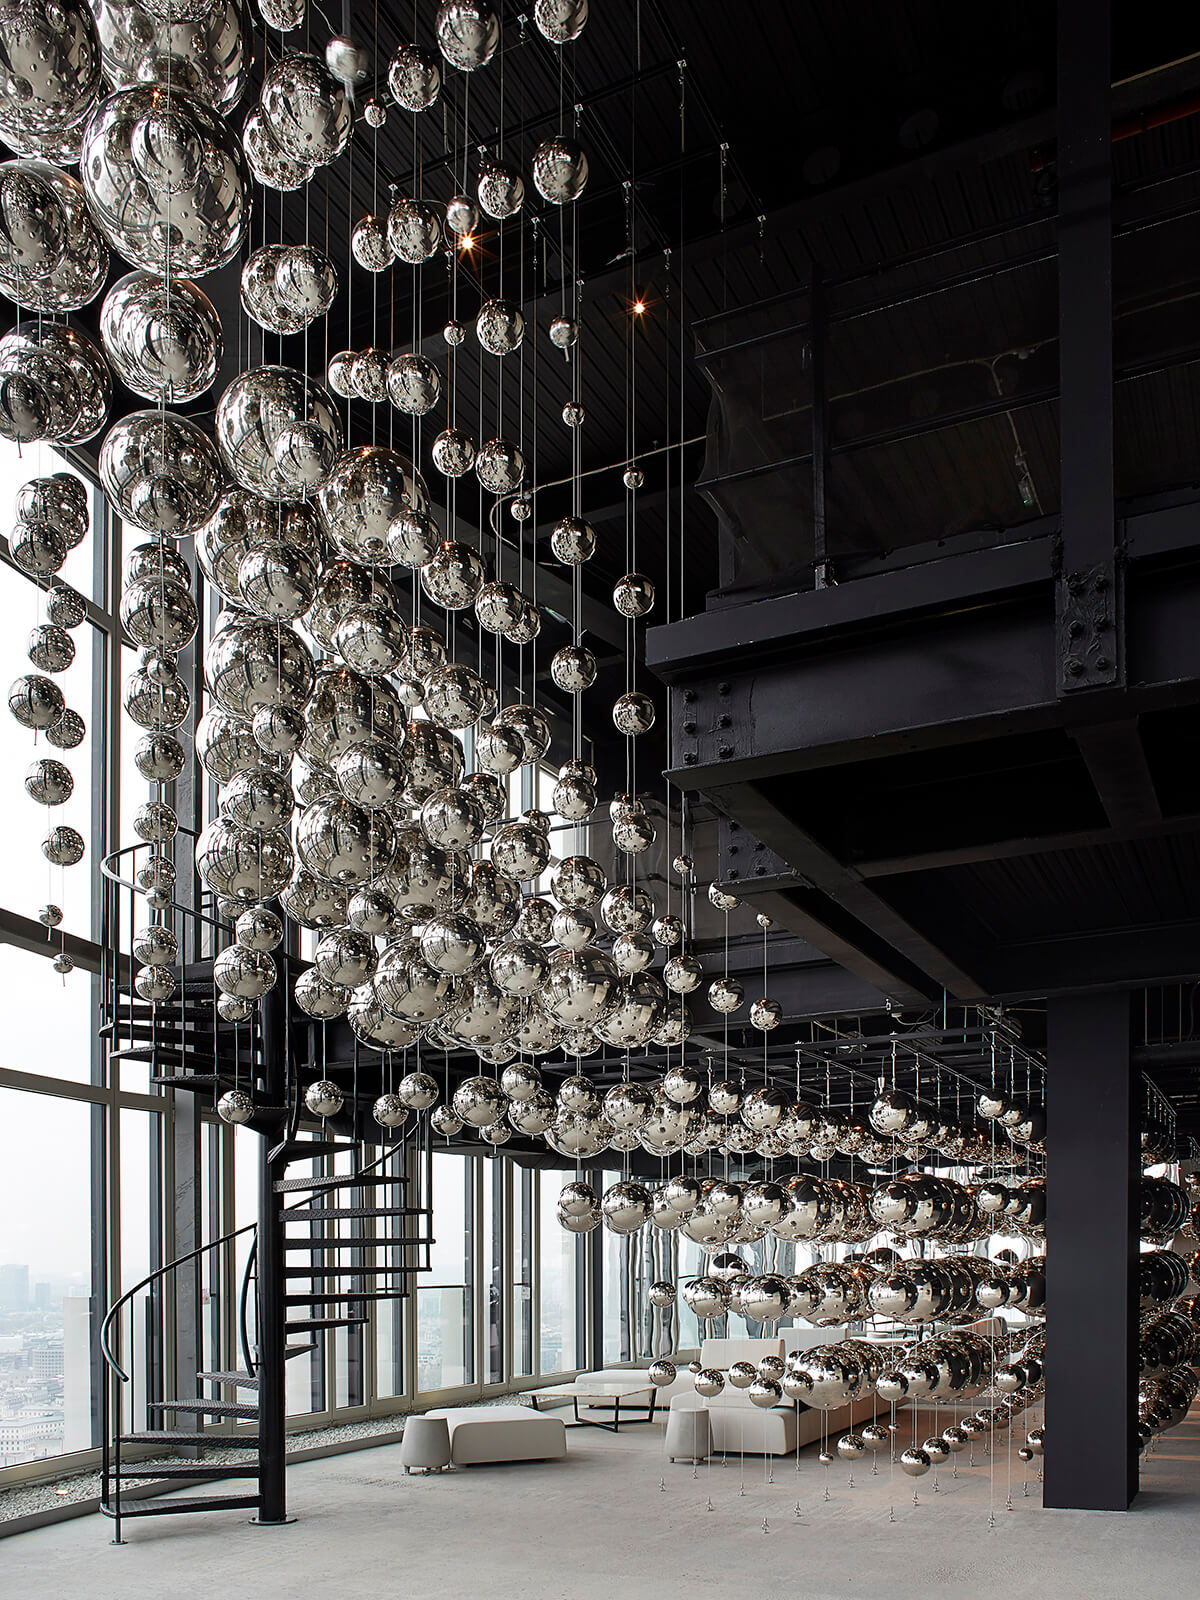 Installation of lines of hanging silver balls